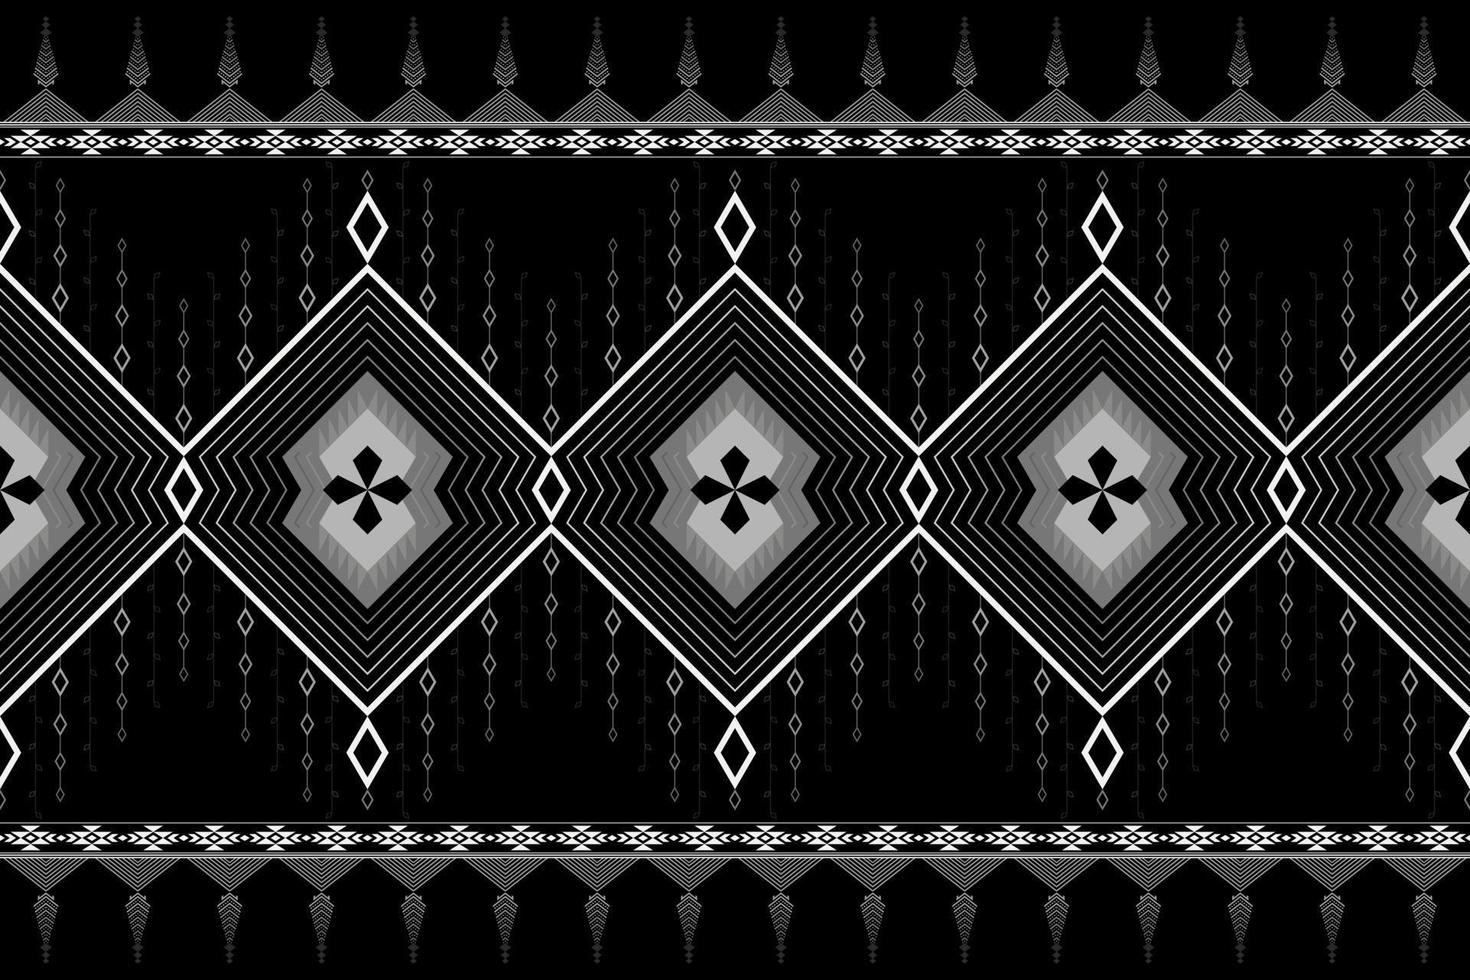 Geometric ethnic style seamless pattern. Design for fabric, wallpaper, background, carpet, clothing. Tribal ethnic vector texture. Vector illustration.  Black and White color.